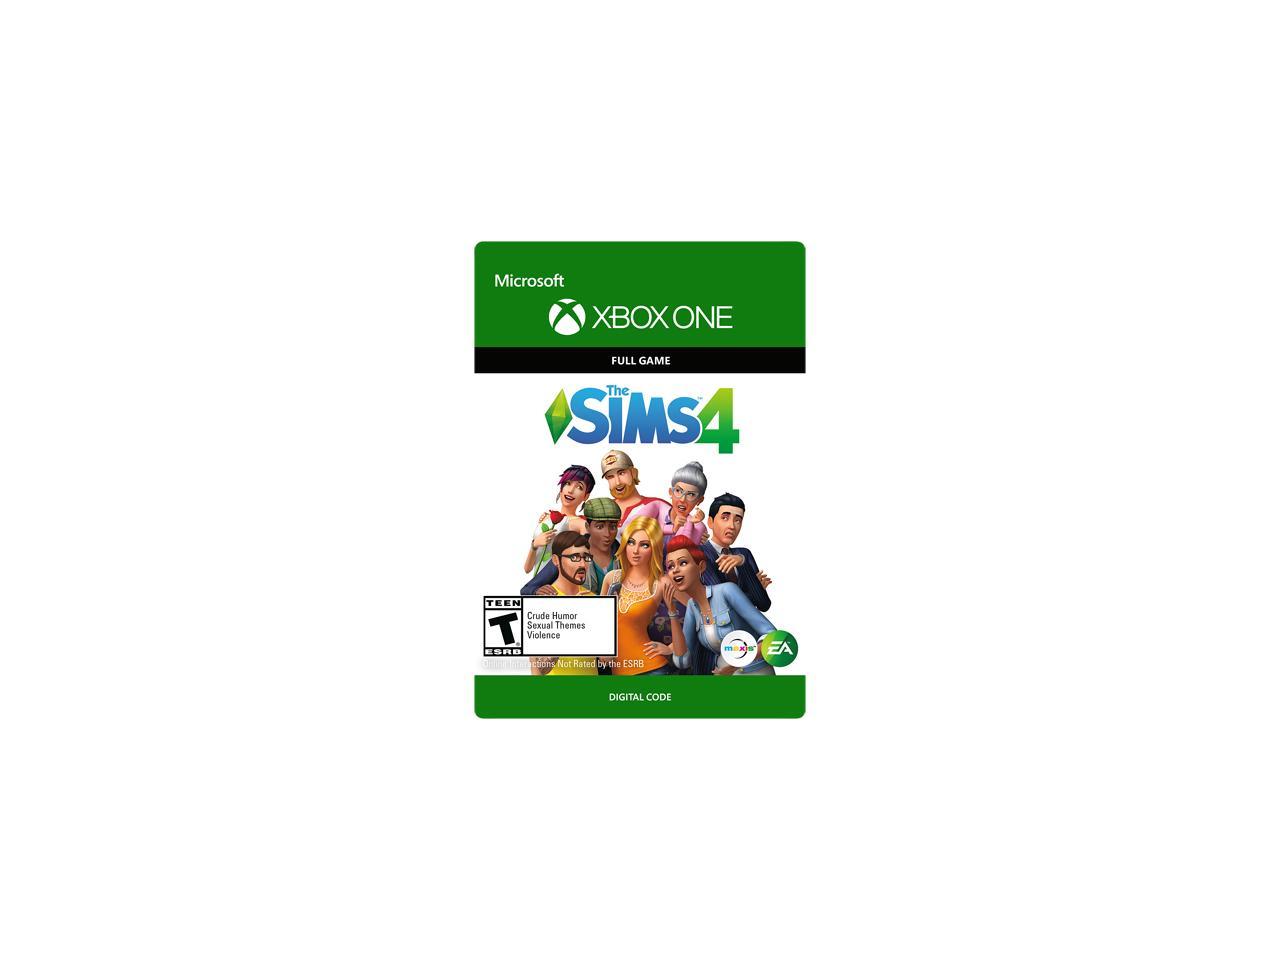 sims 4 xbox one digital download free